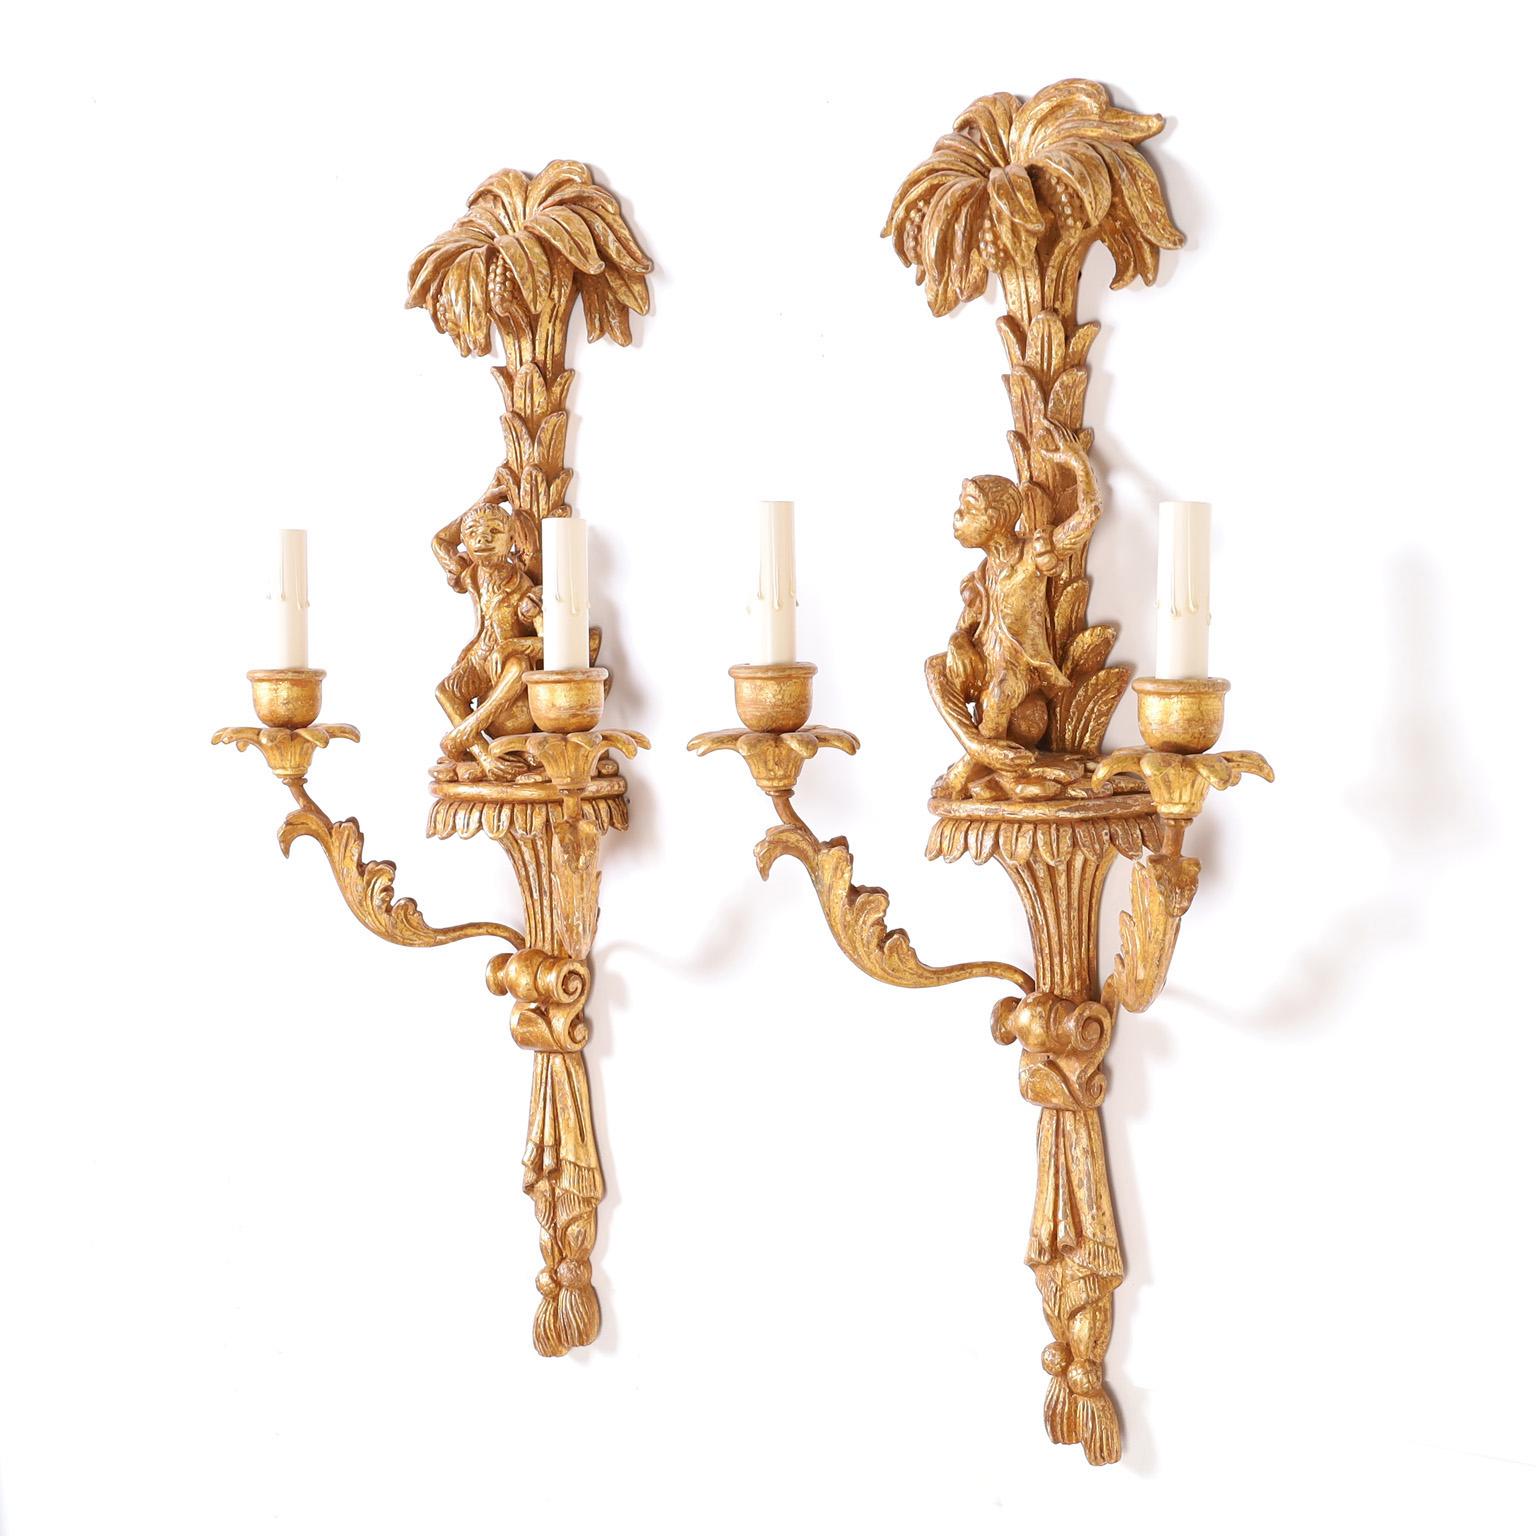 Rococo Pair of Antique Carved Wood Italian Wall Sconces with Monkeys